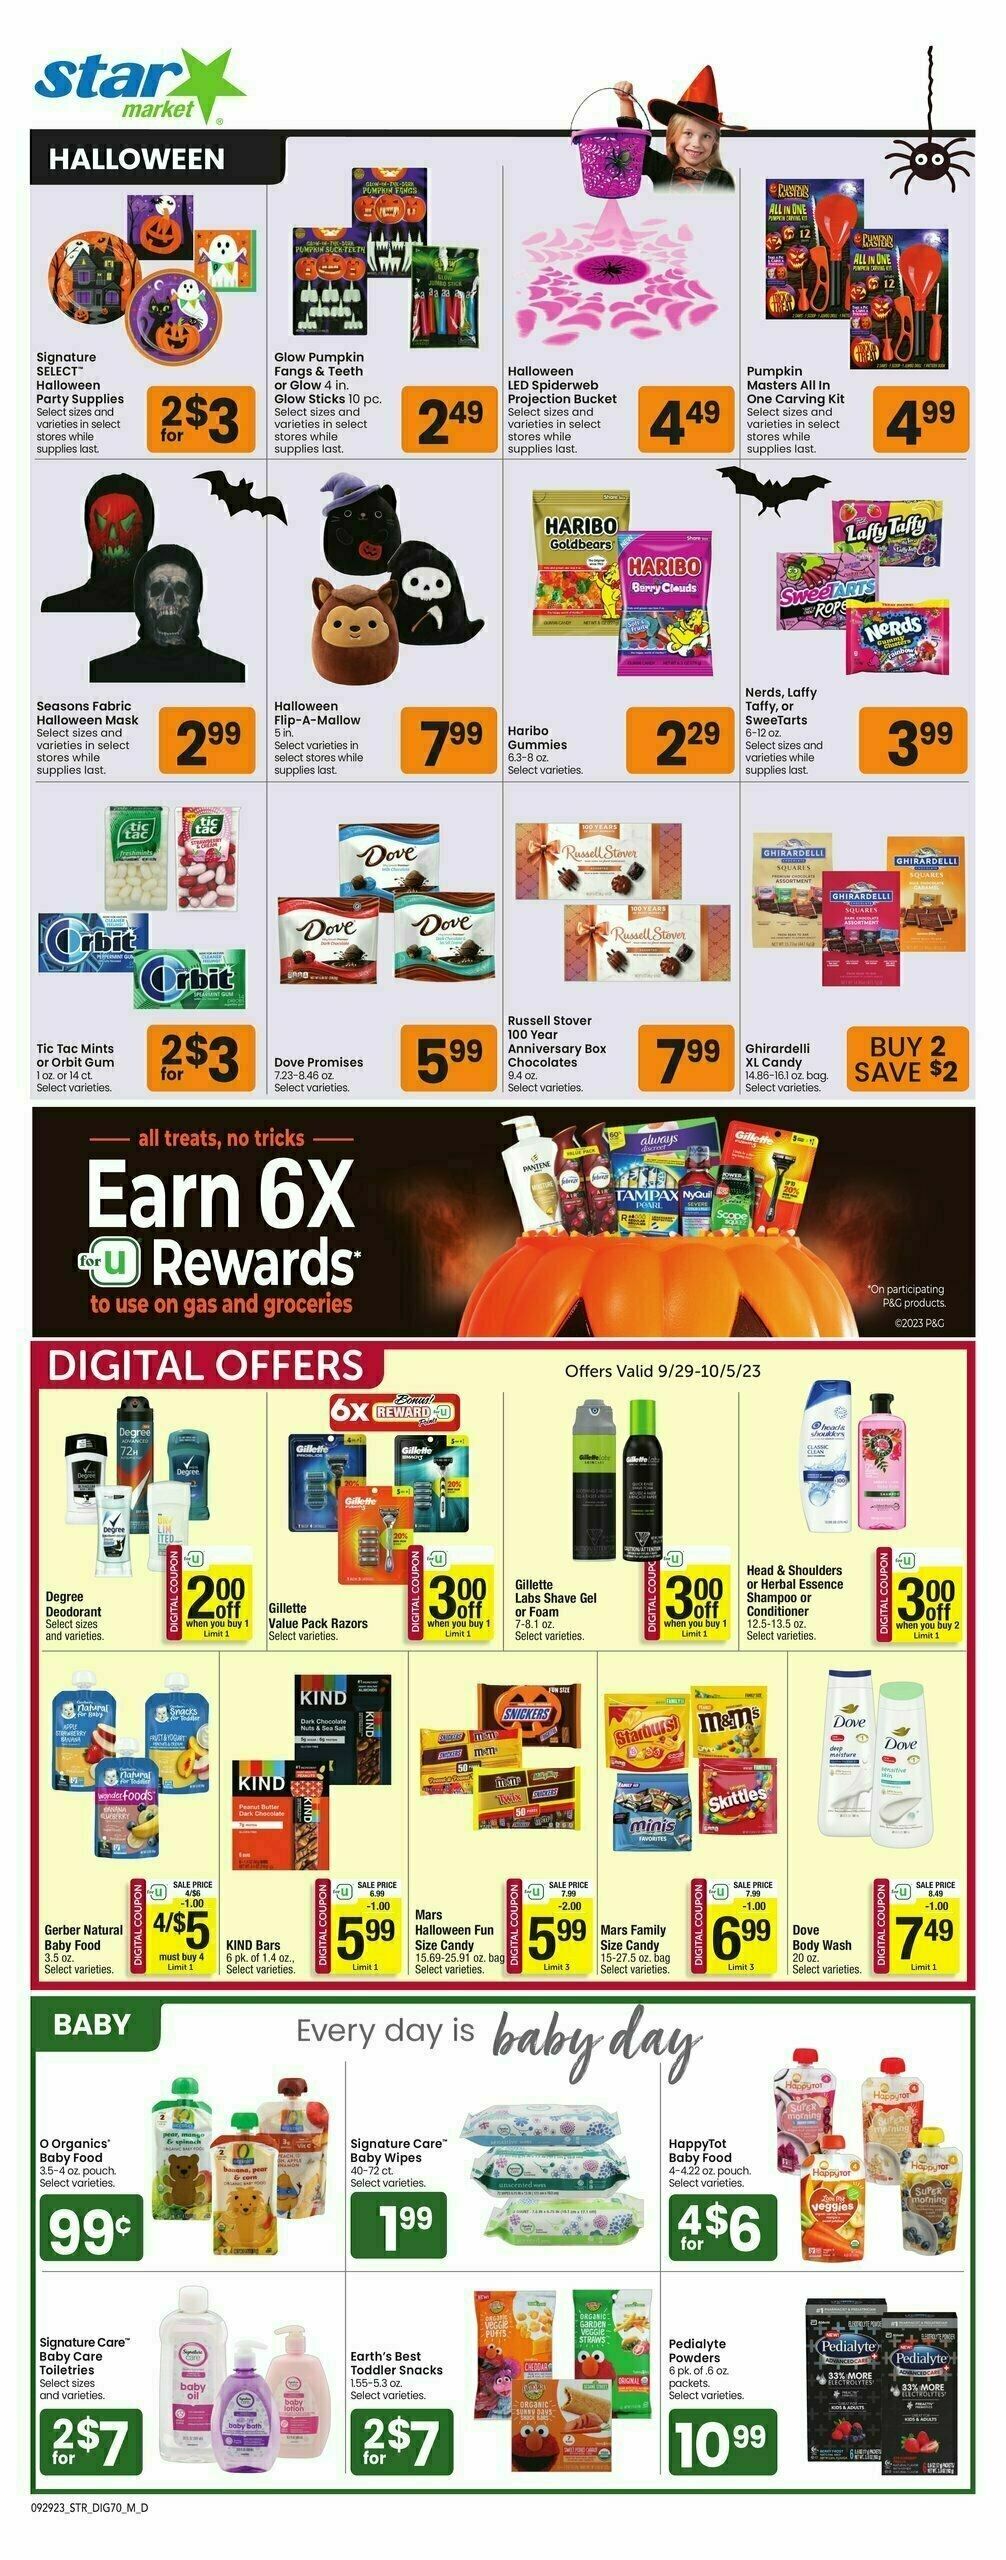 Star Market Additional Savings Weekly Ad from September 29